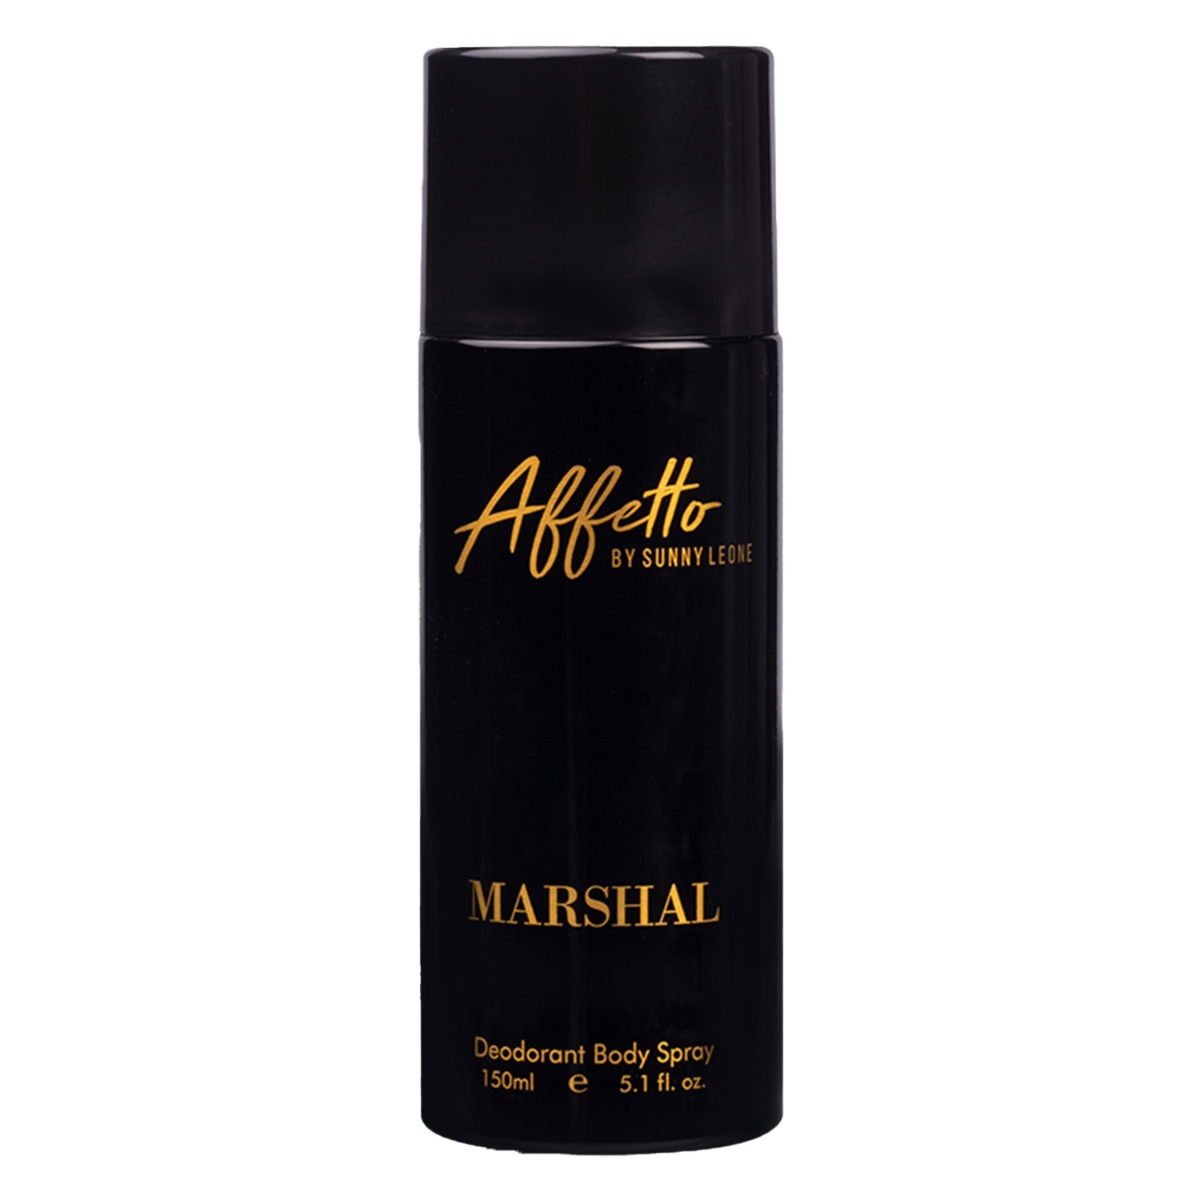 Star Struck by Sunny Leone Affetto by Sunny Leone Deo for Men - Marshal, 150ml